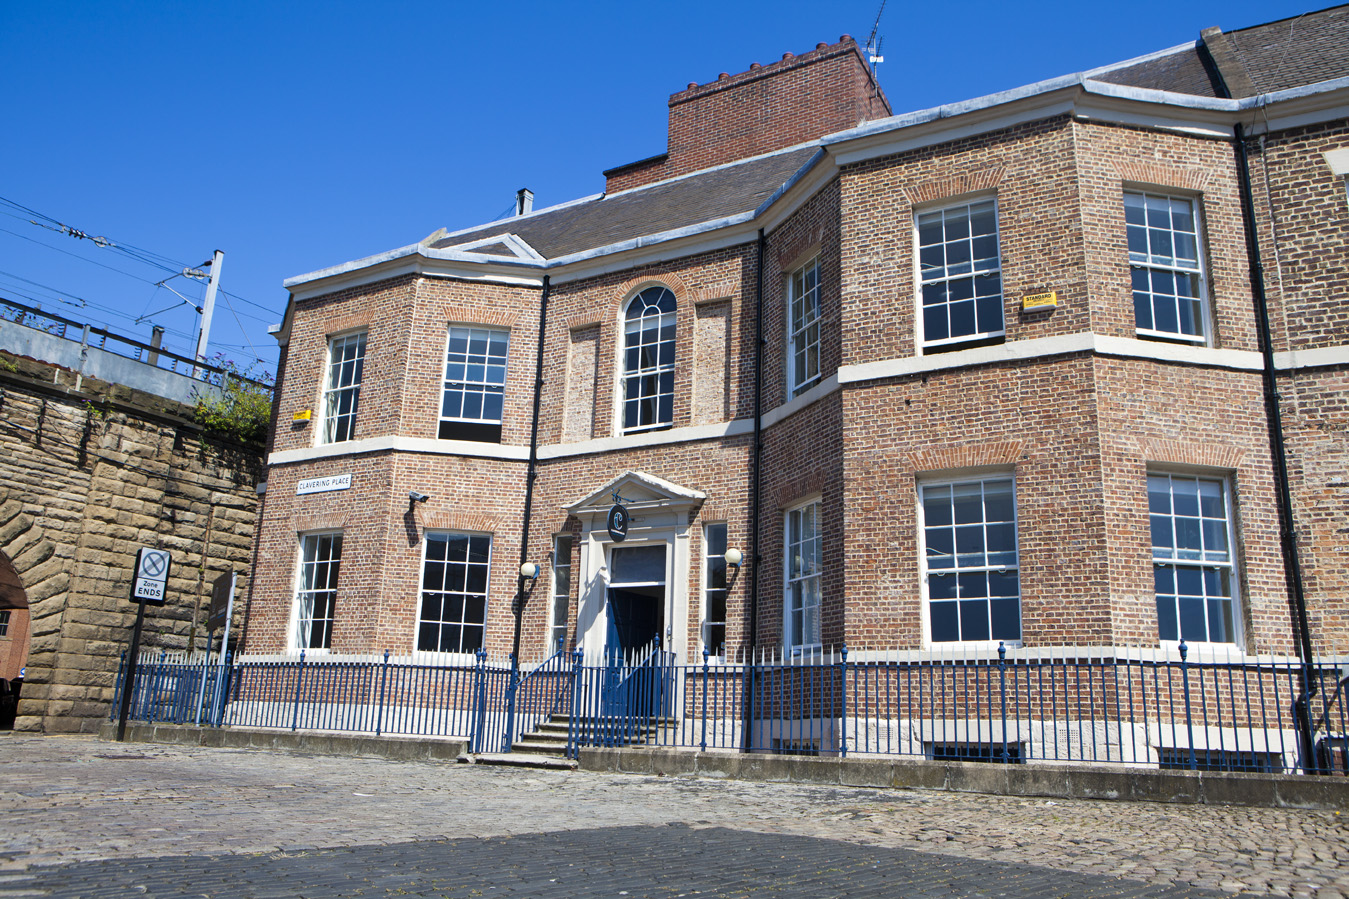 Clavering House Business Centre provides serviced office space in Newcastle city centre